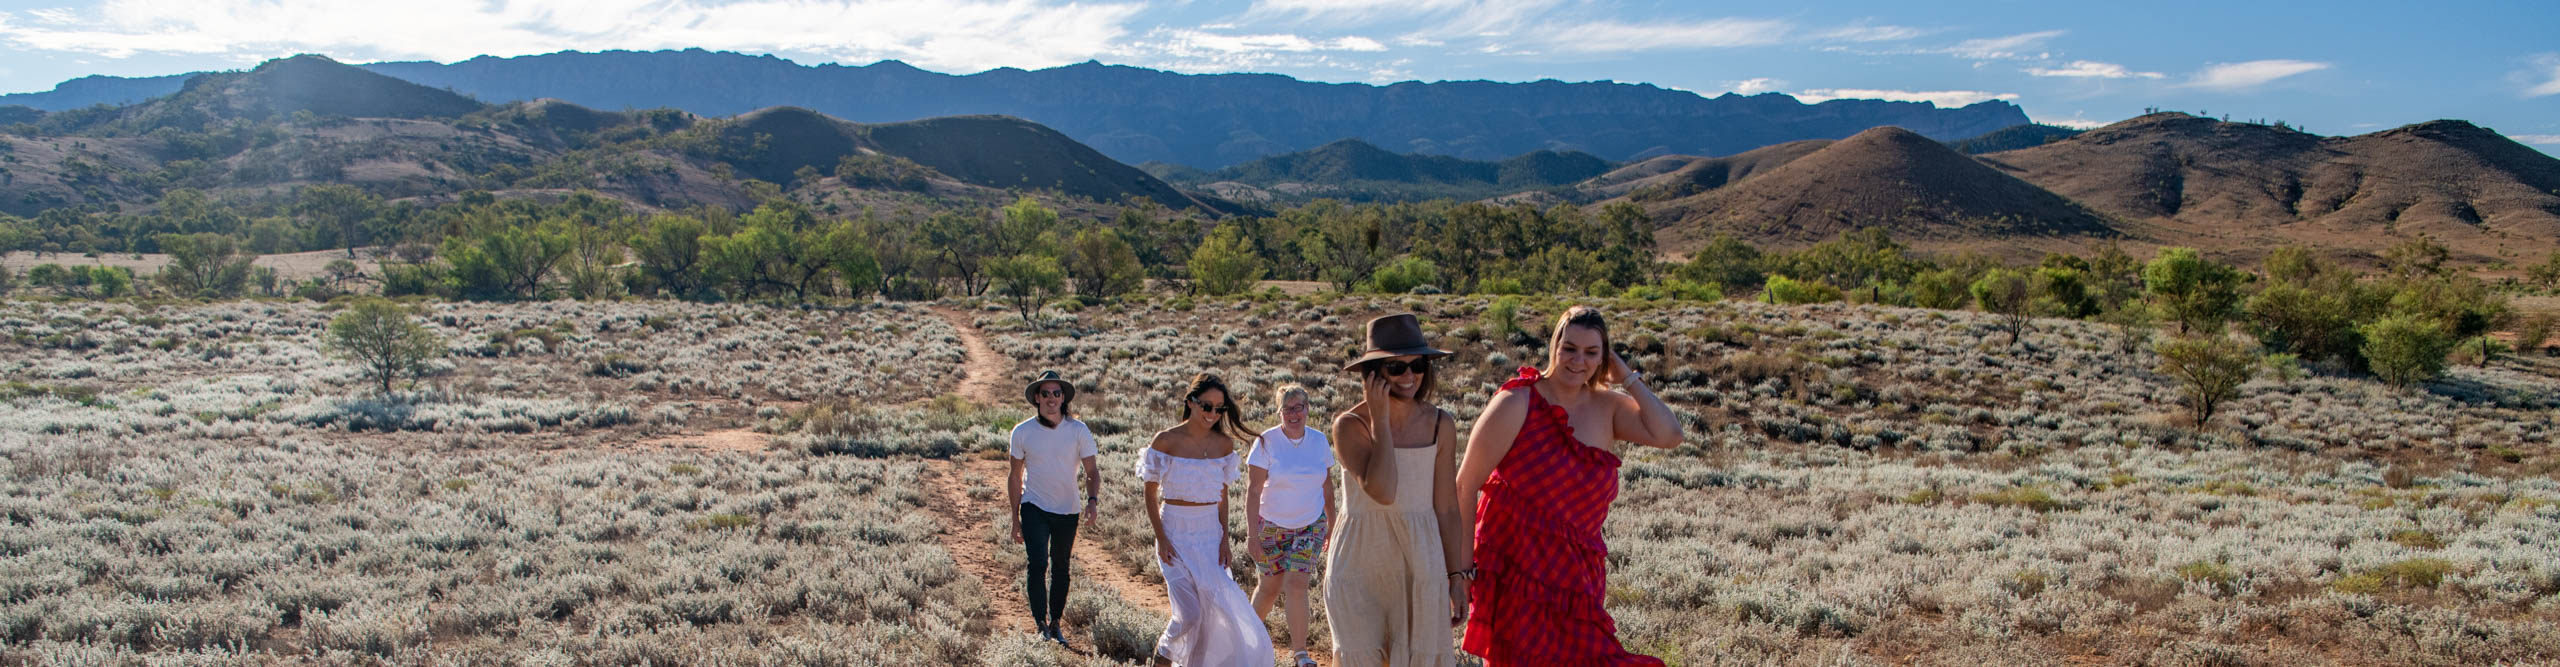 Group walking through the bush with the Flinders Ranges in the background, South Australia 